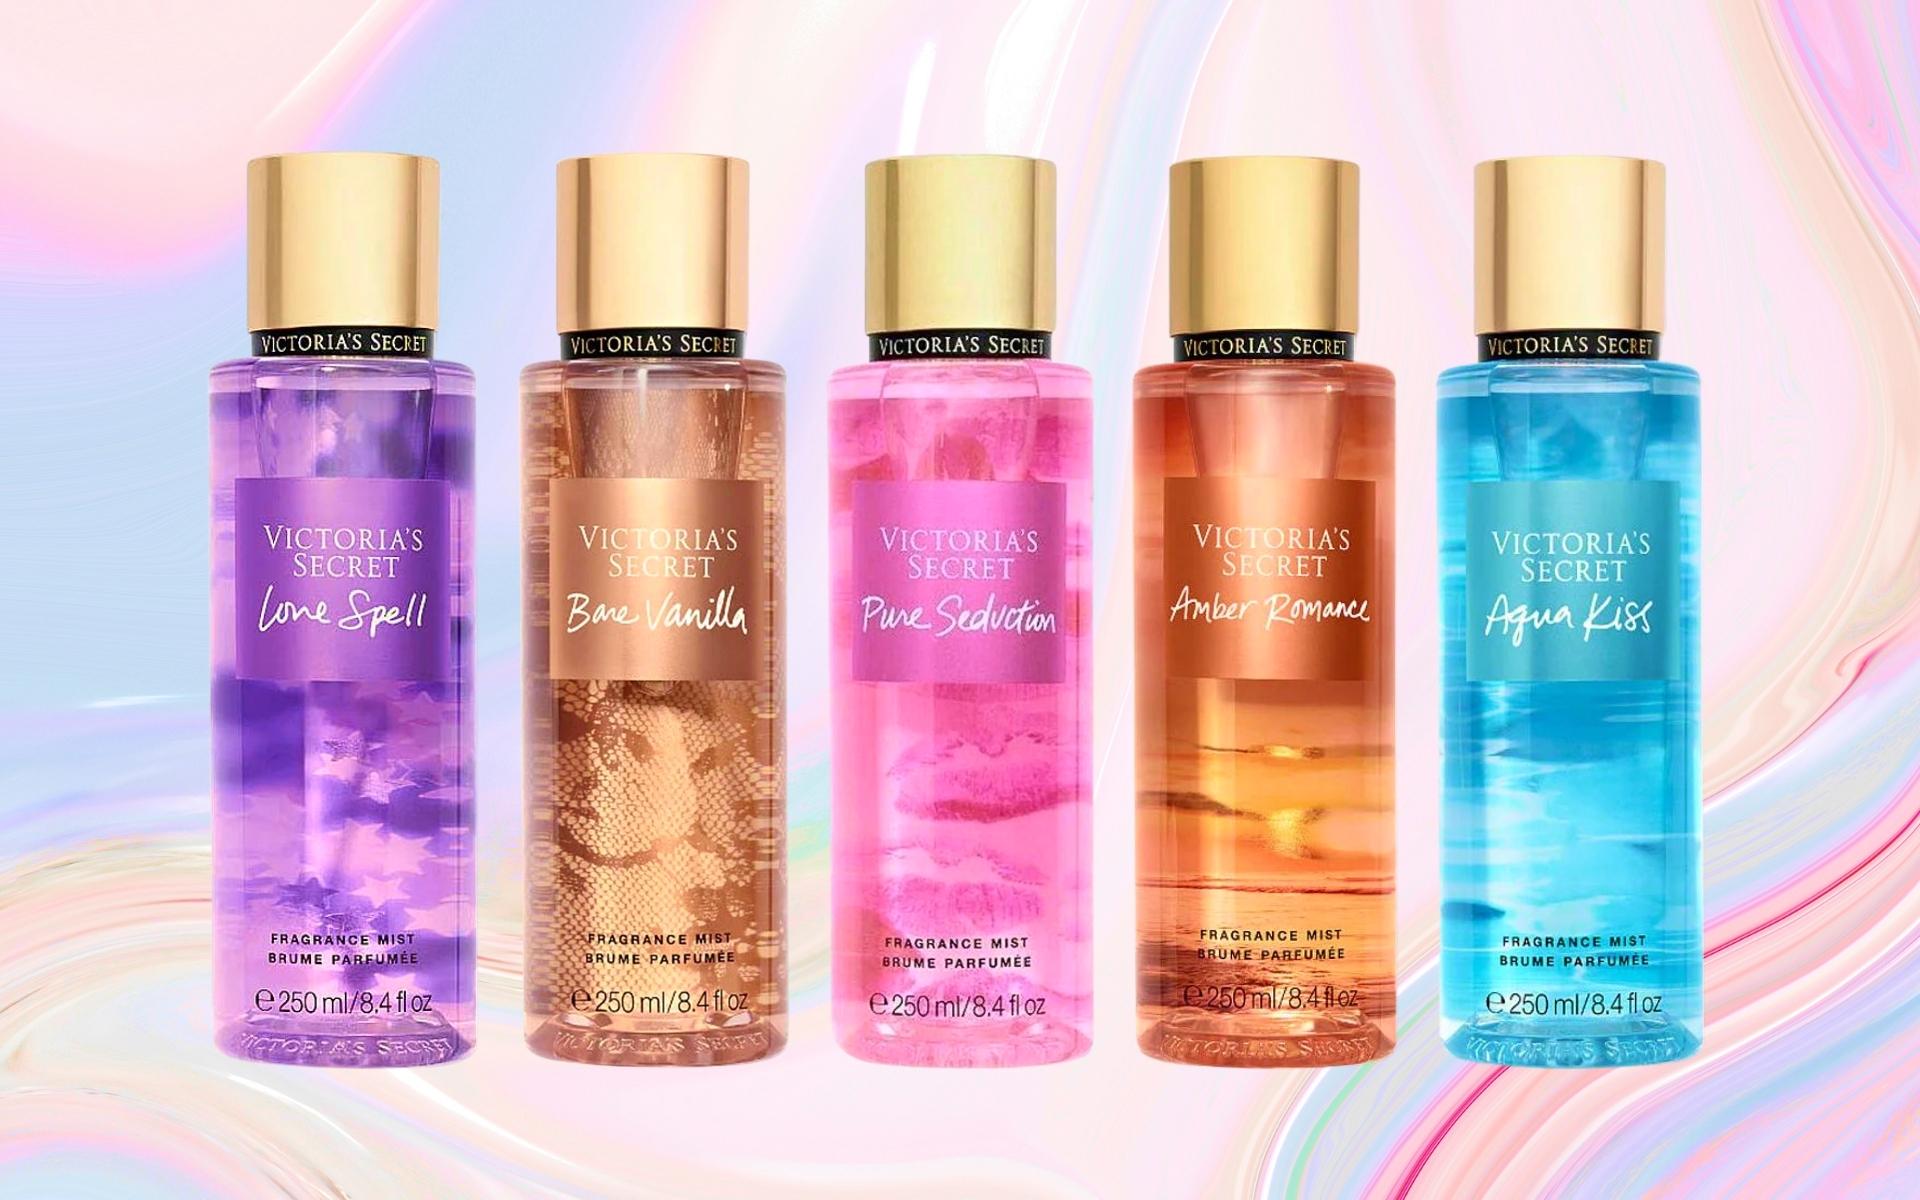 9 Best Victoria'S Secret Body Mists (Tested & Reviewed)